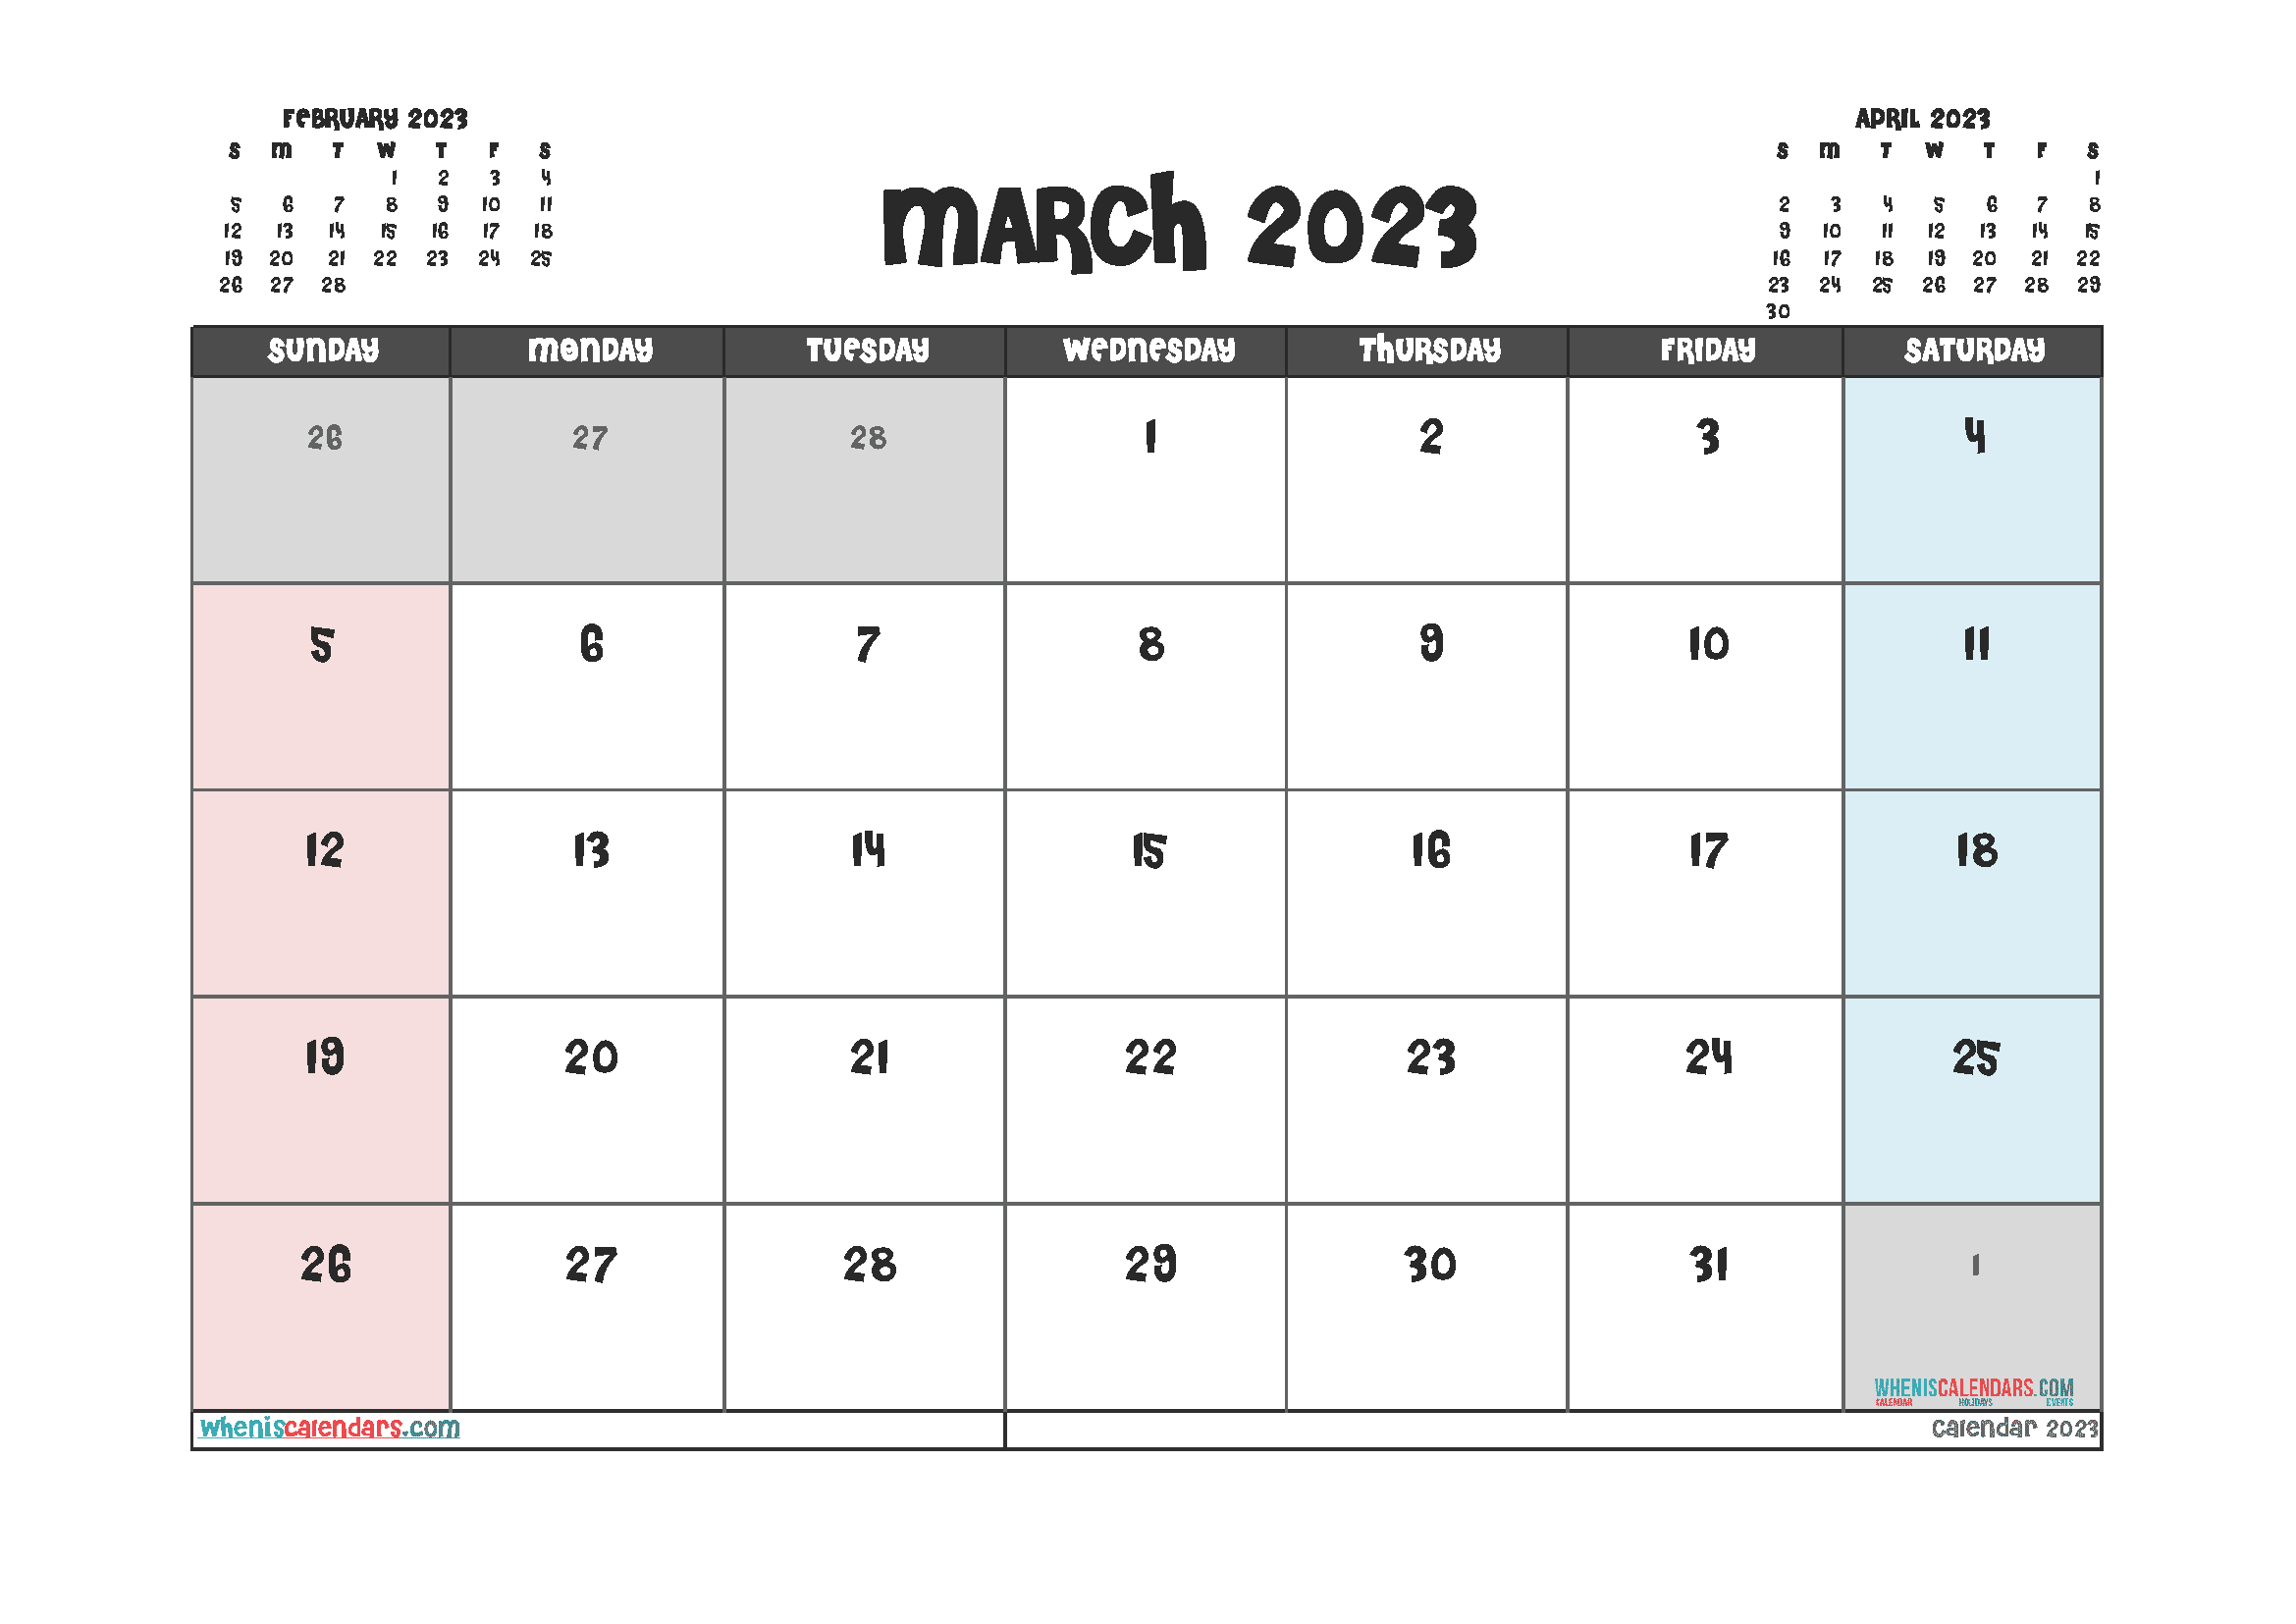 Free Calendar 2023 March with Holidays PDF in Landscape